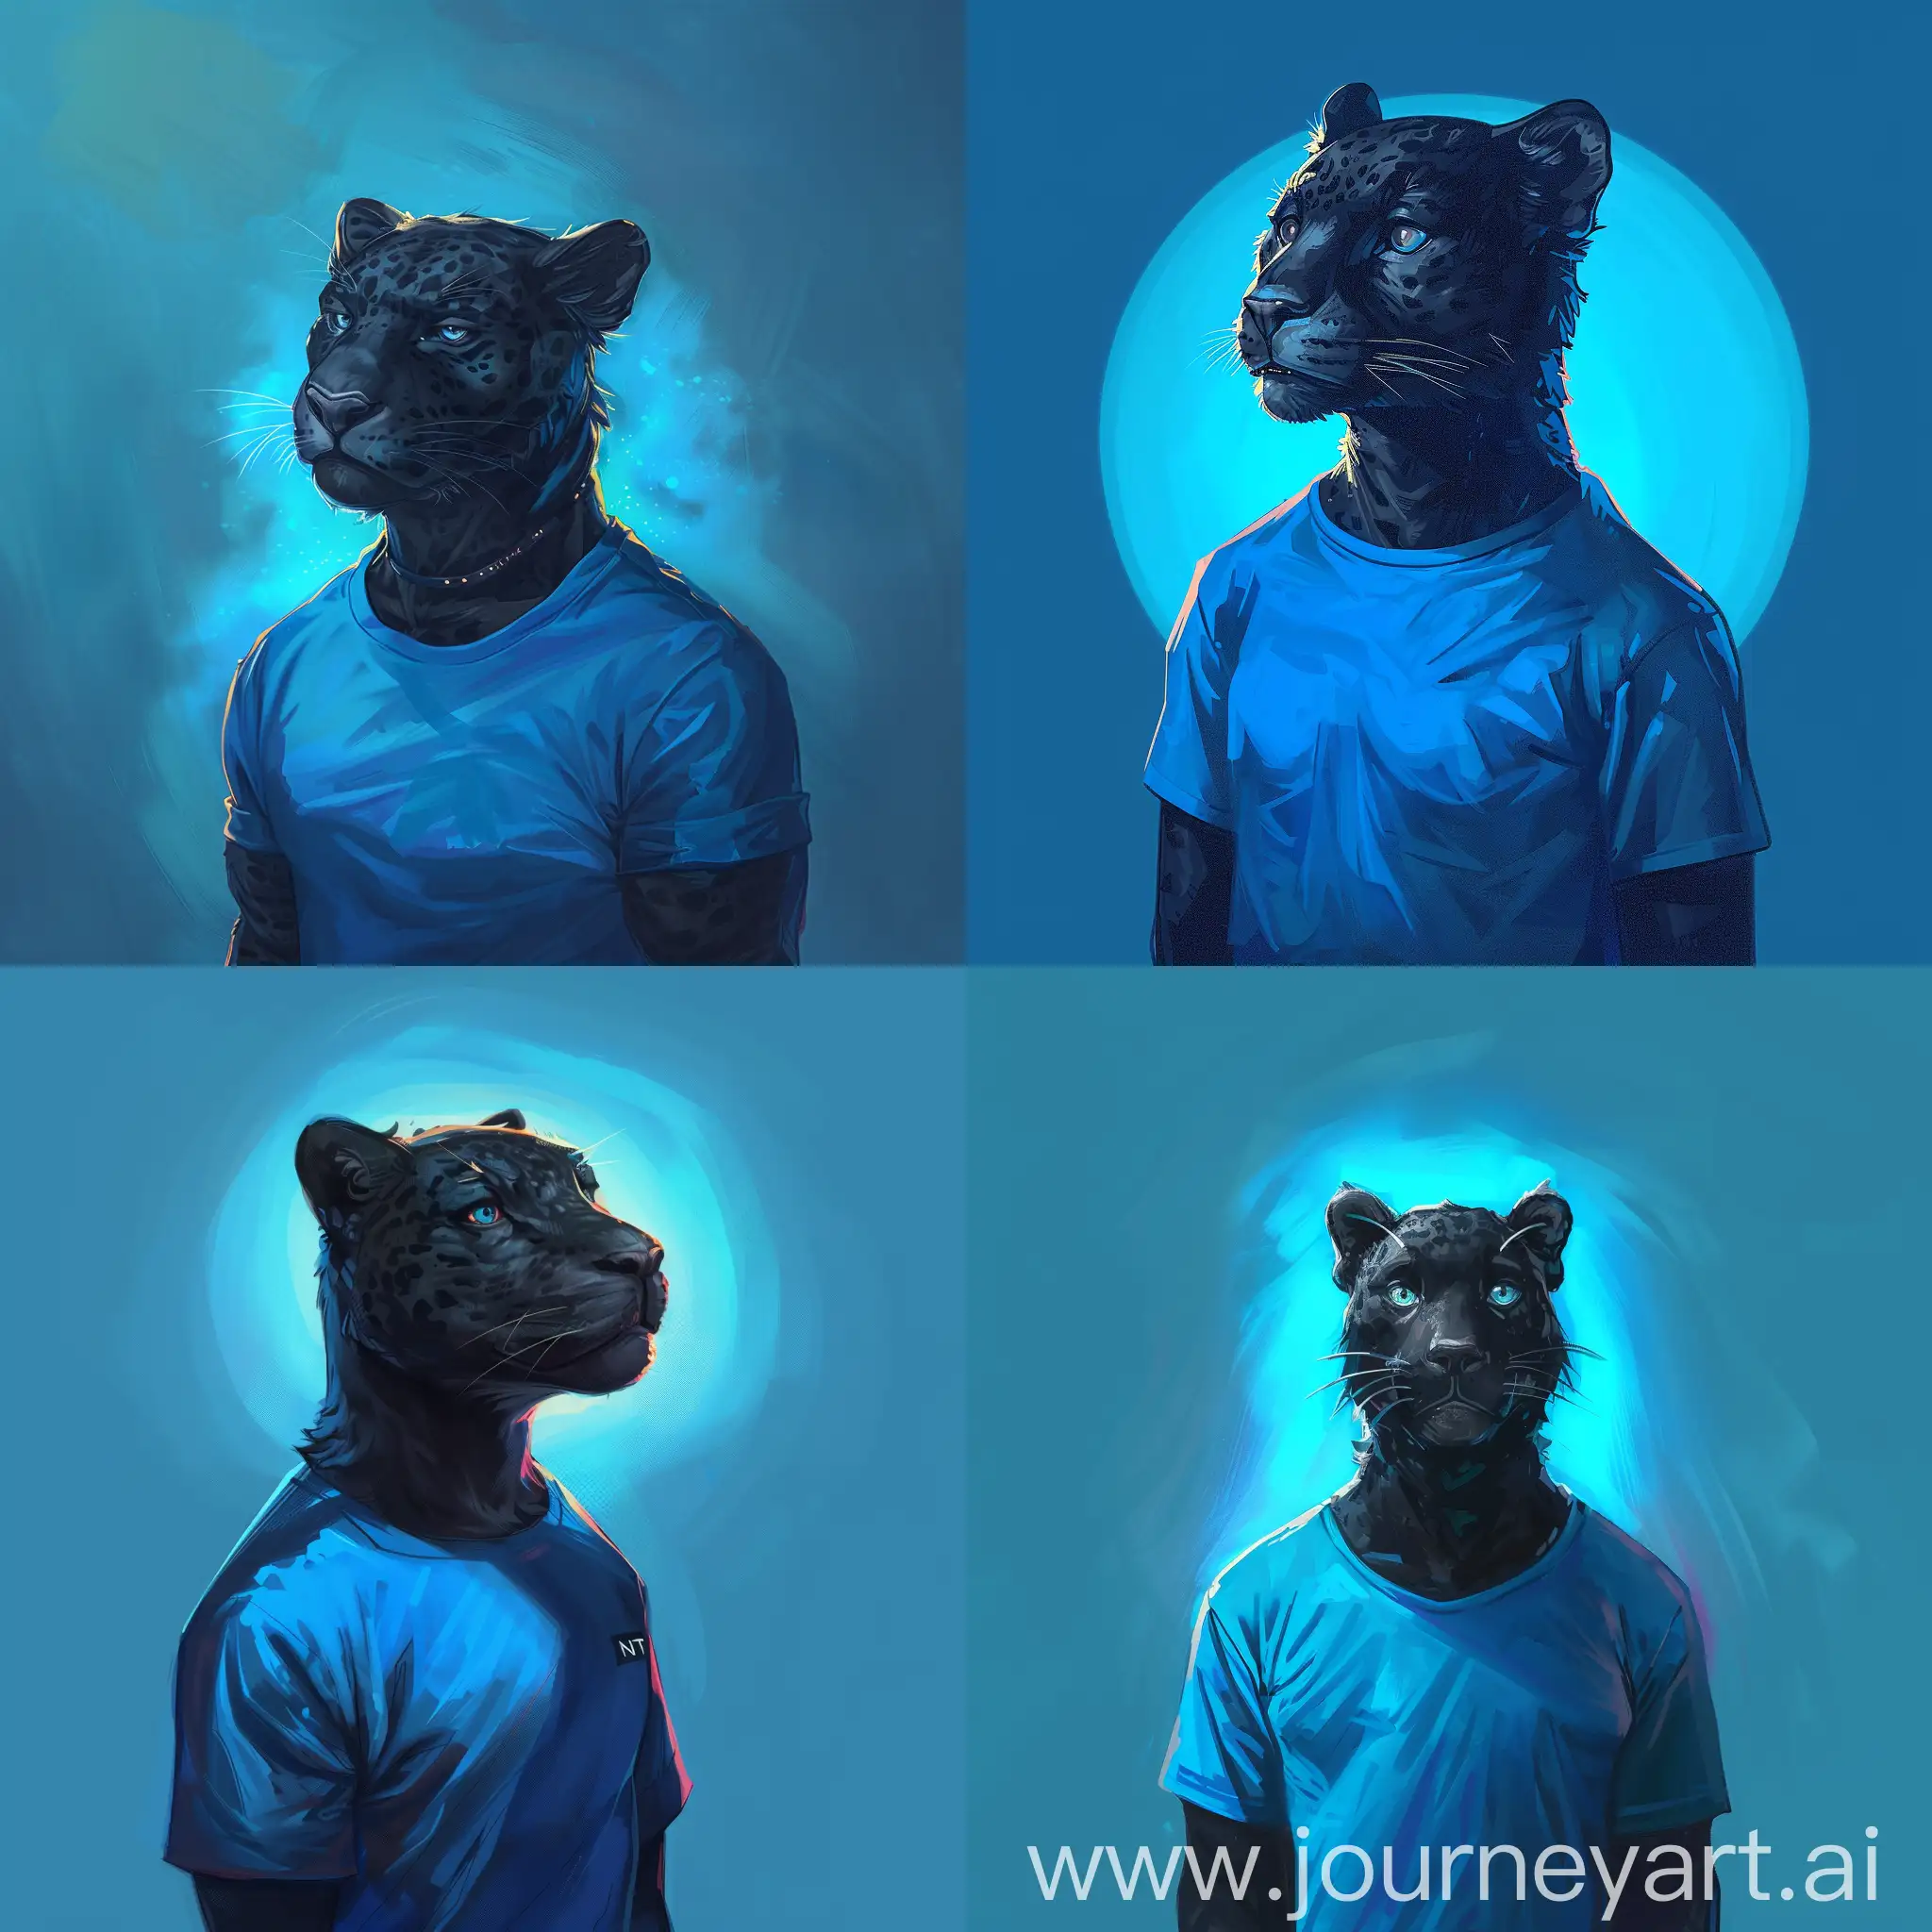 Enoch bolles art style of  , black jaguar as a suave human man, dressed in a vibrant blue  t-shirt , NFT profile picture, whimsical, textured brushwork, gentle facial expression, front view. 8k``` bright glowing blue background